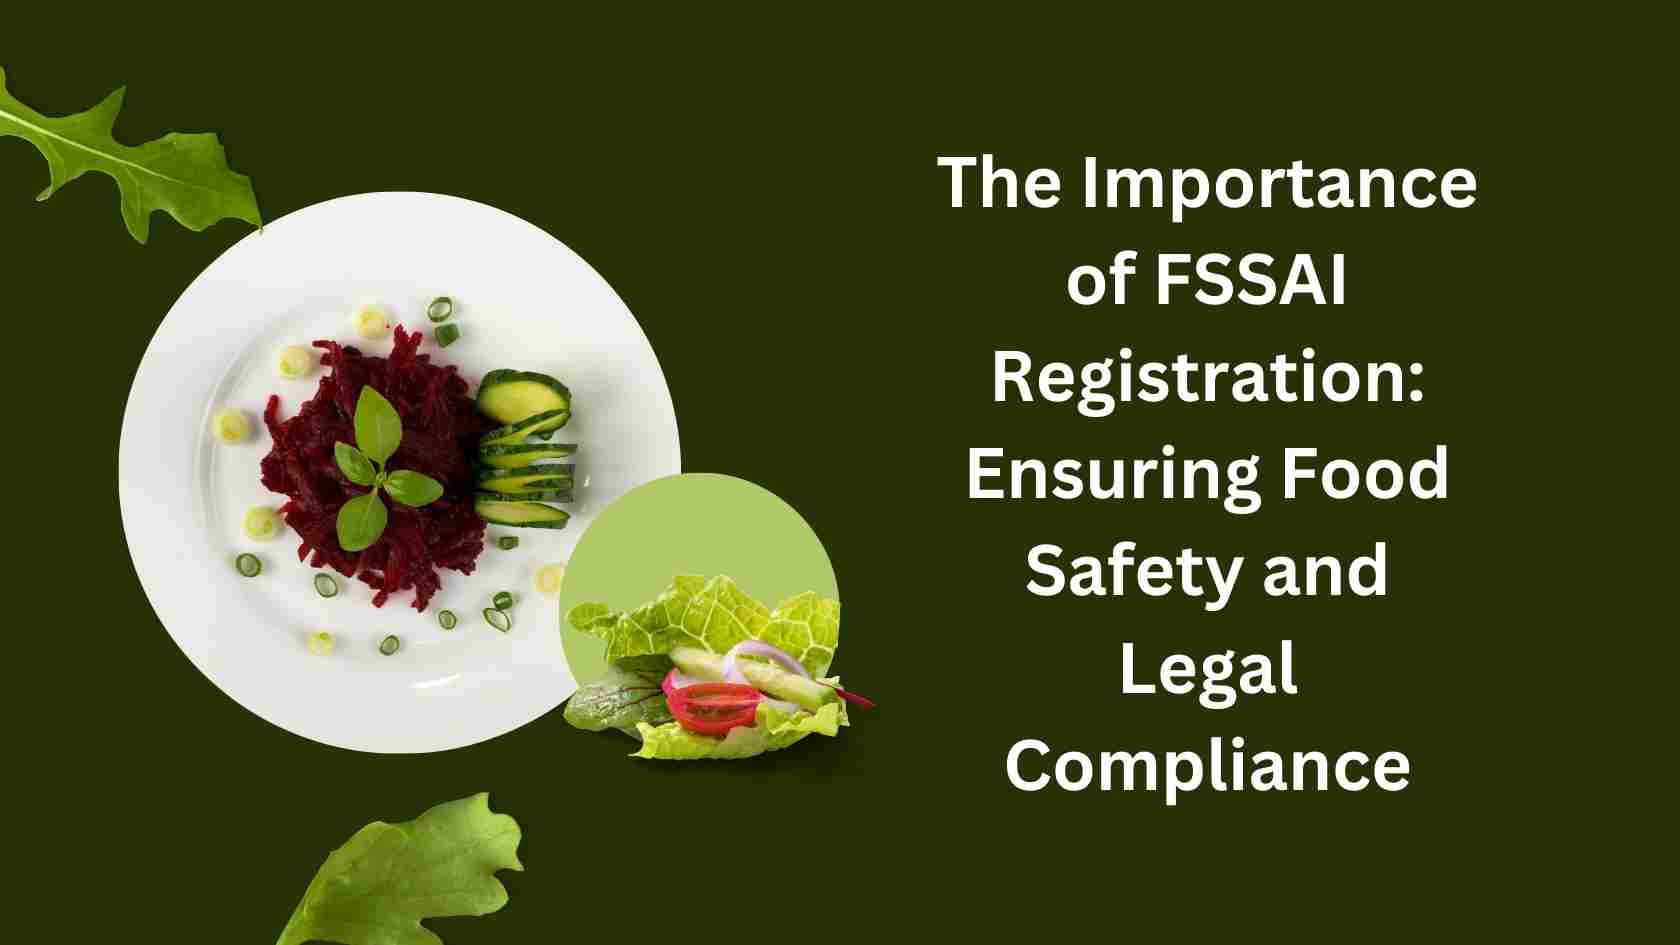 The Importance of FSSAI Registration Ensuring Food Safety and Legal Compliance